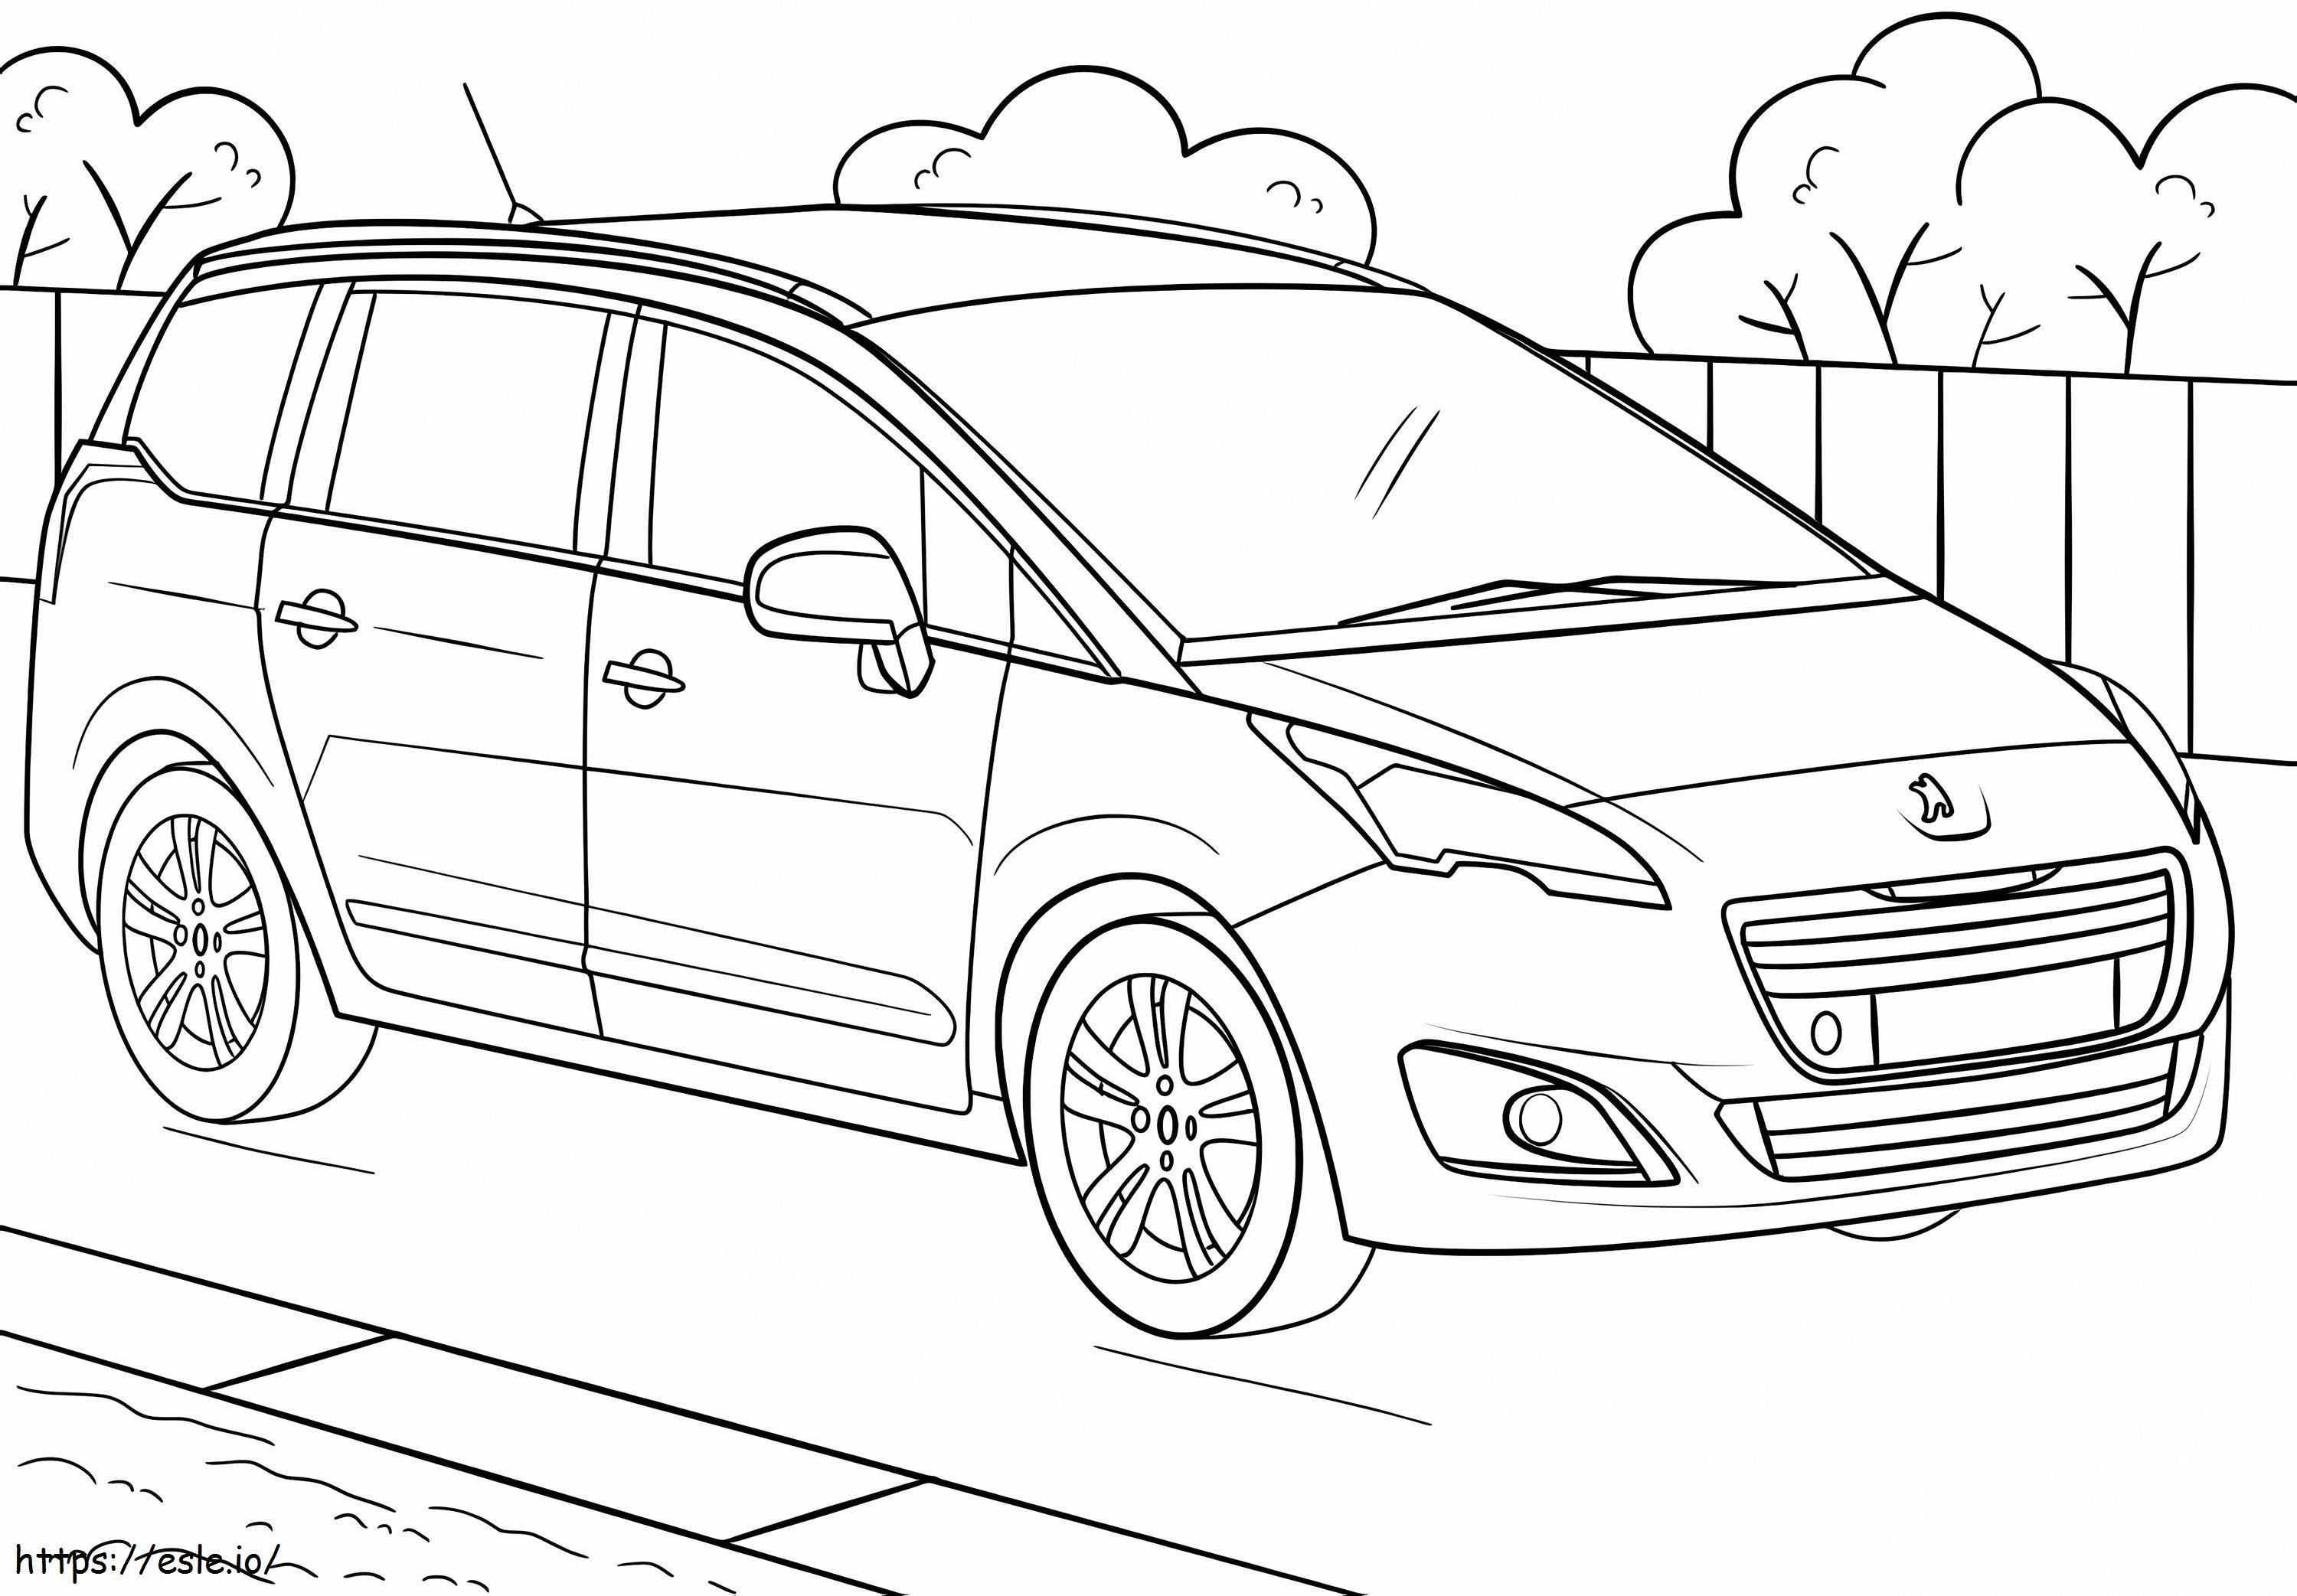 Peugeot 5008 coloring page